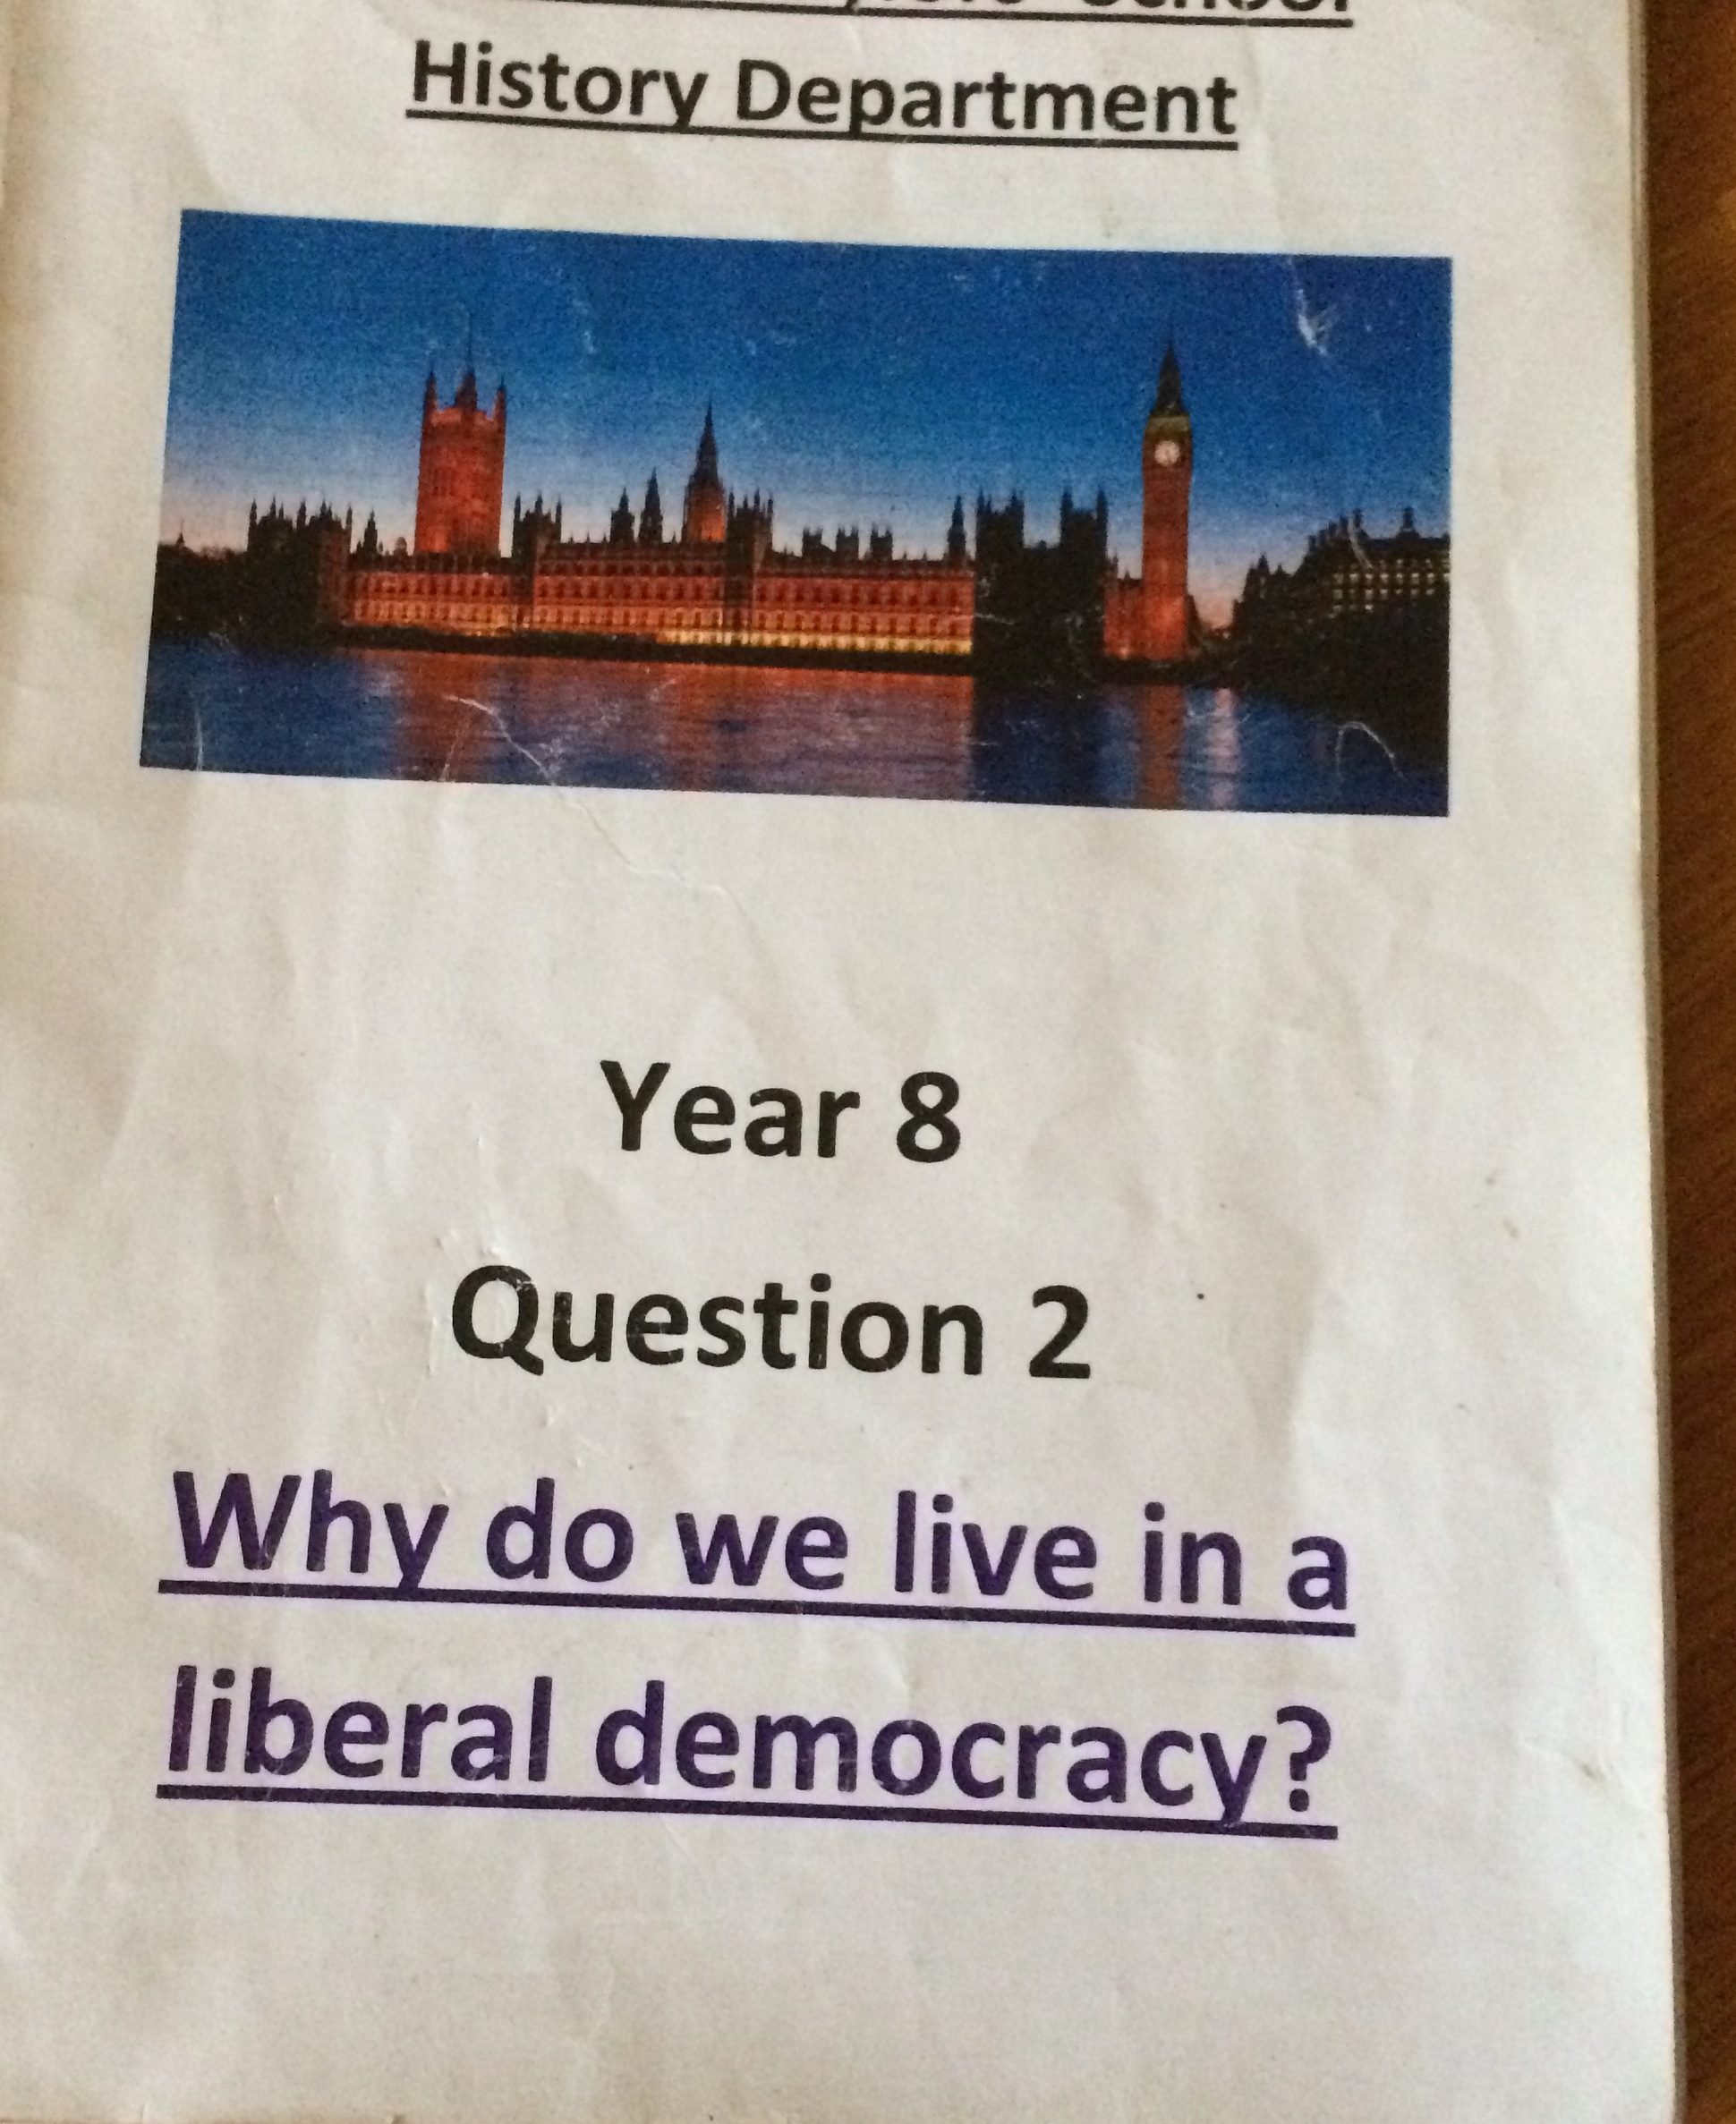 Why do we live in a liberal democracy?